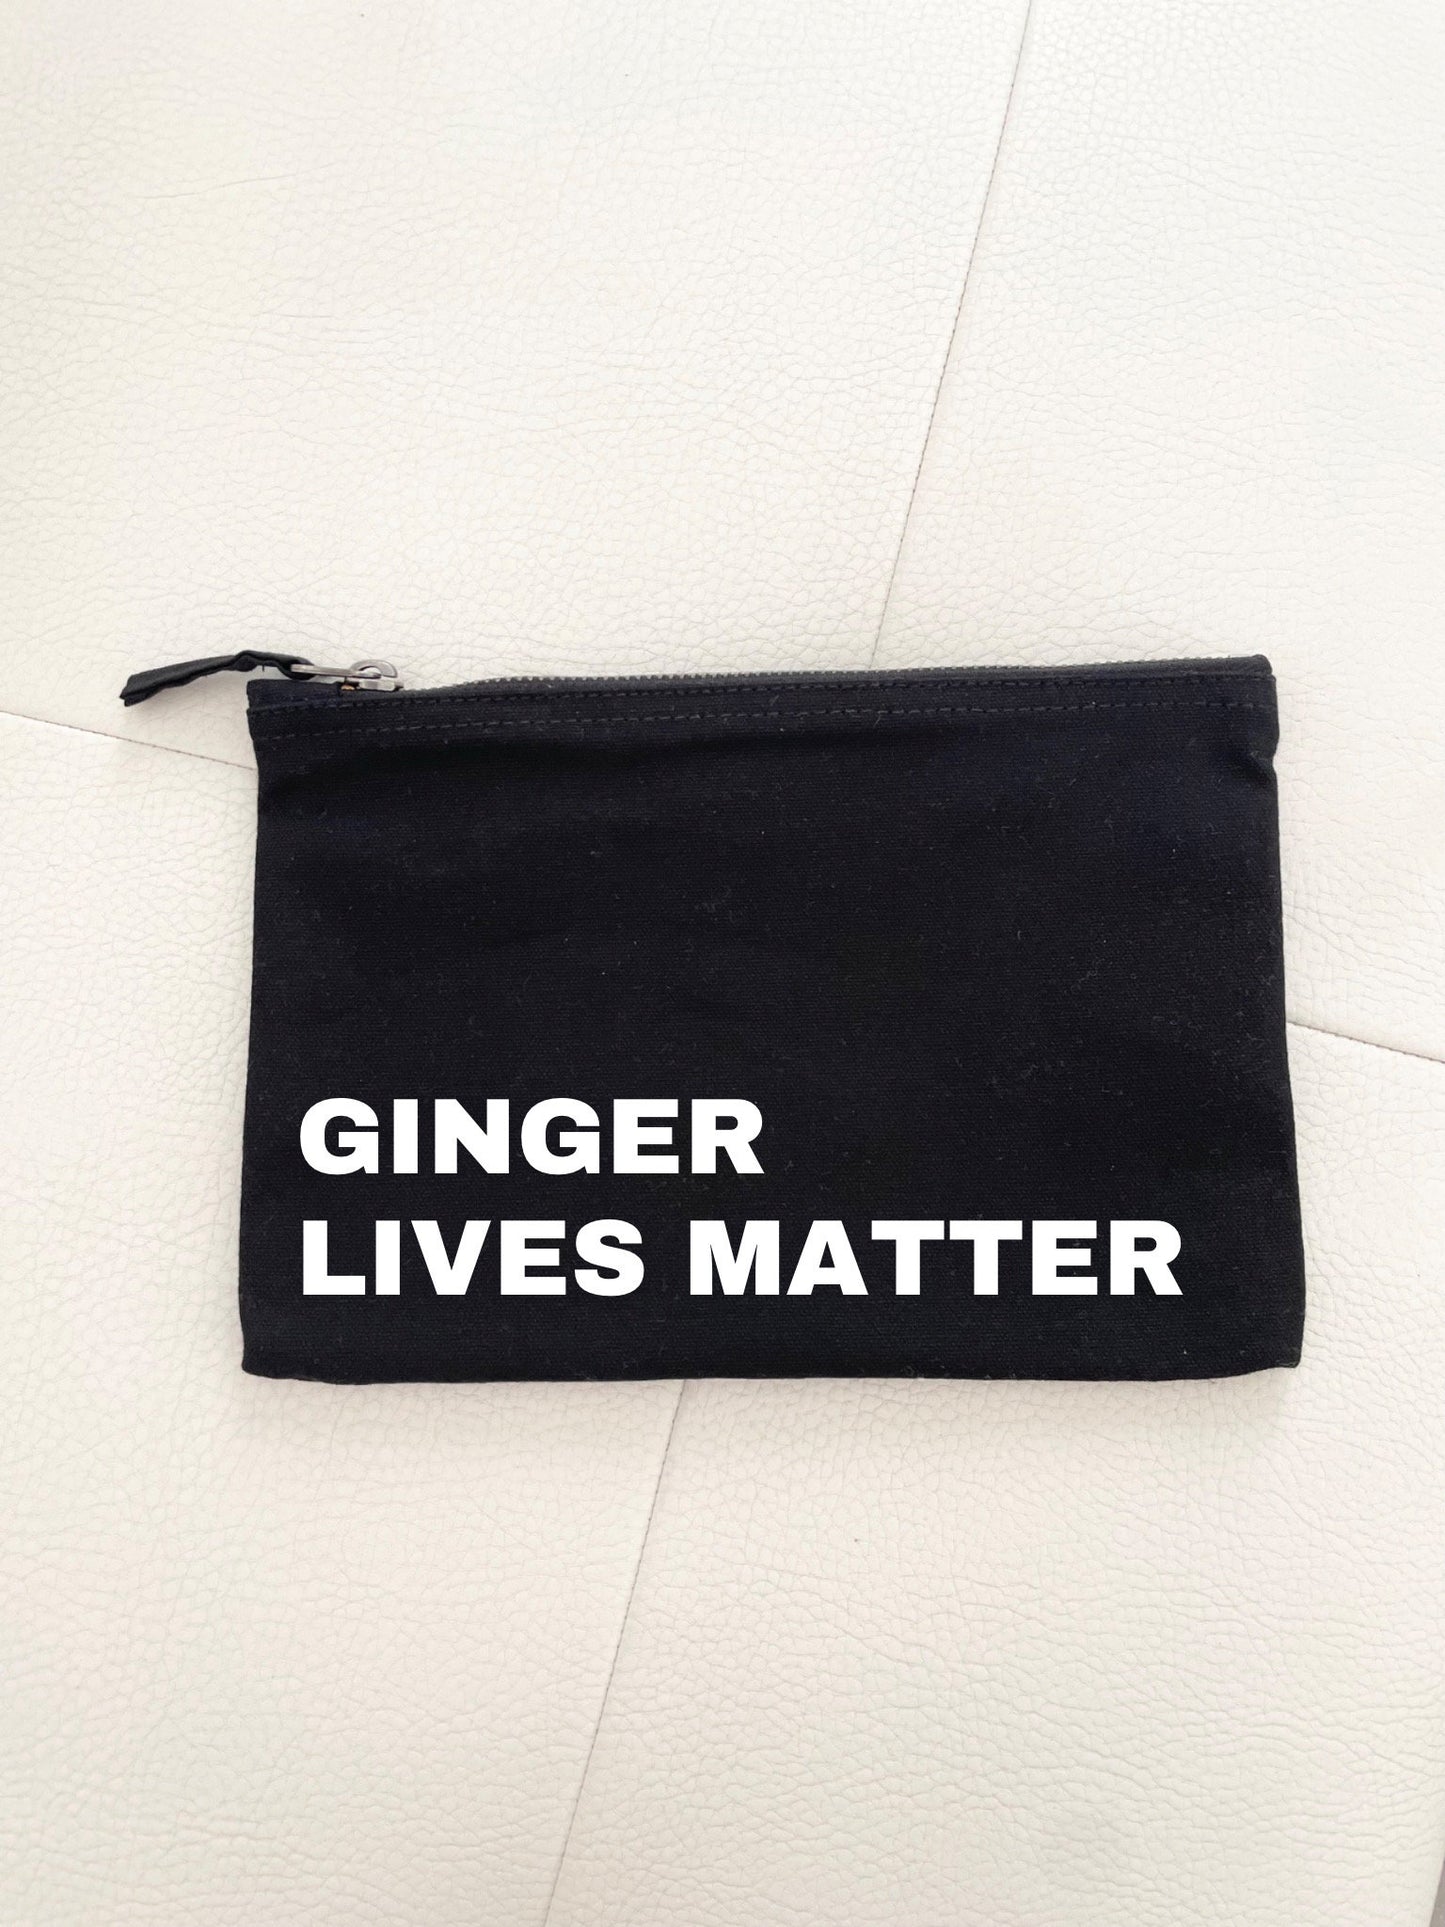 Ginger lives matter pouch, joke novelty alternative gifts for redhead friends, make up case,hair accessory pouch